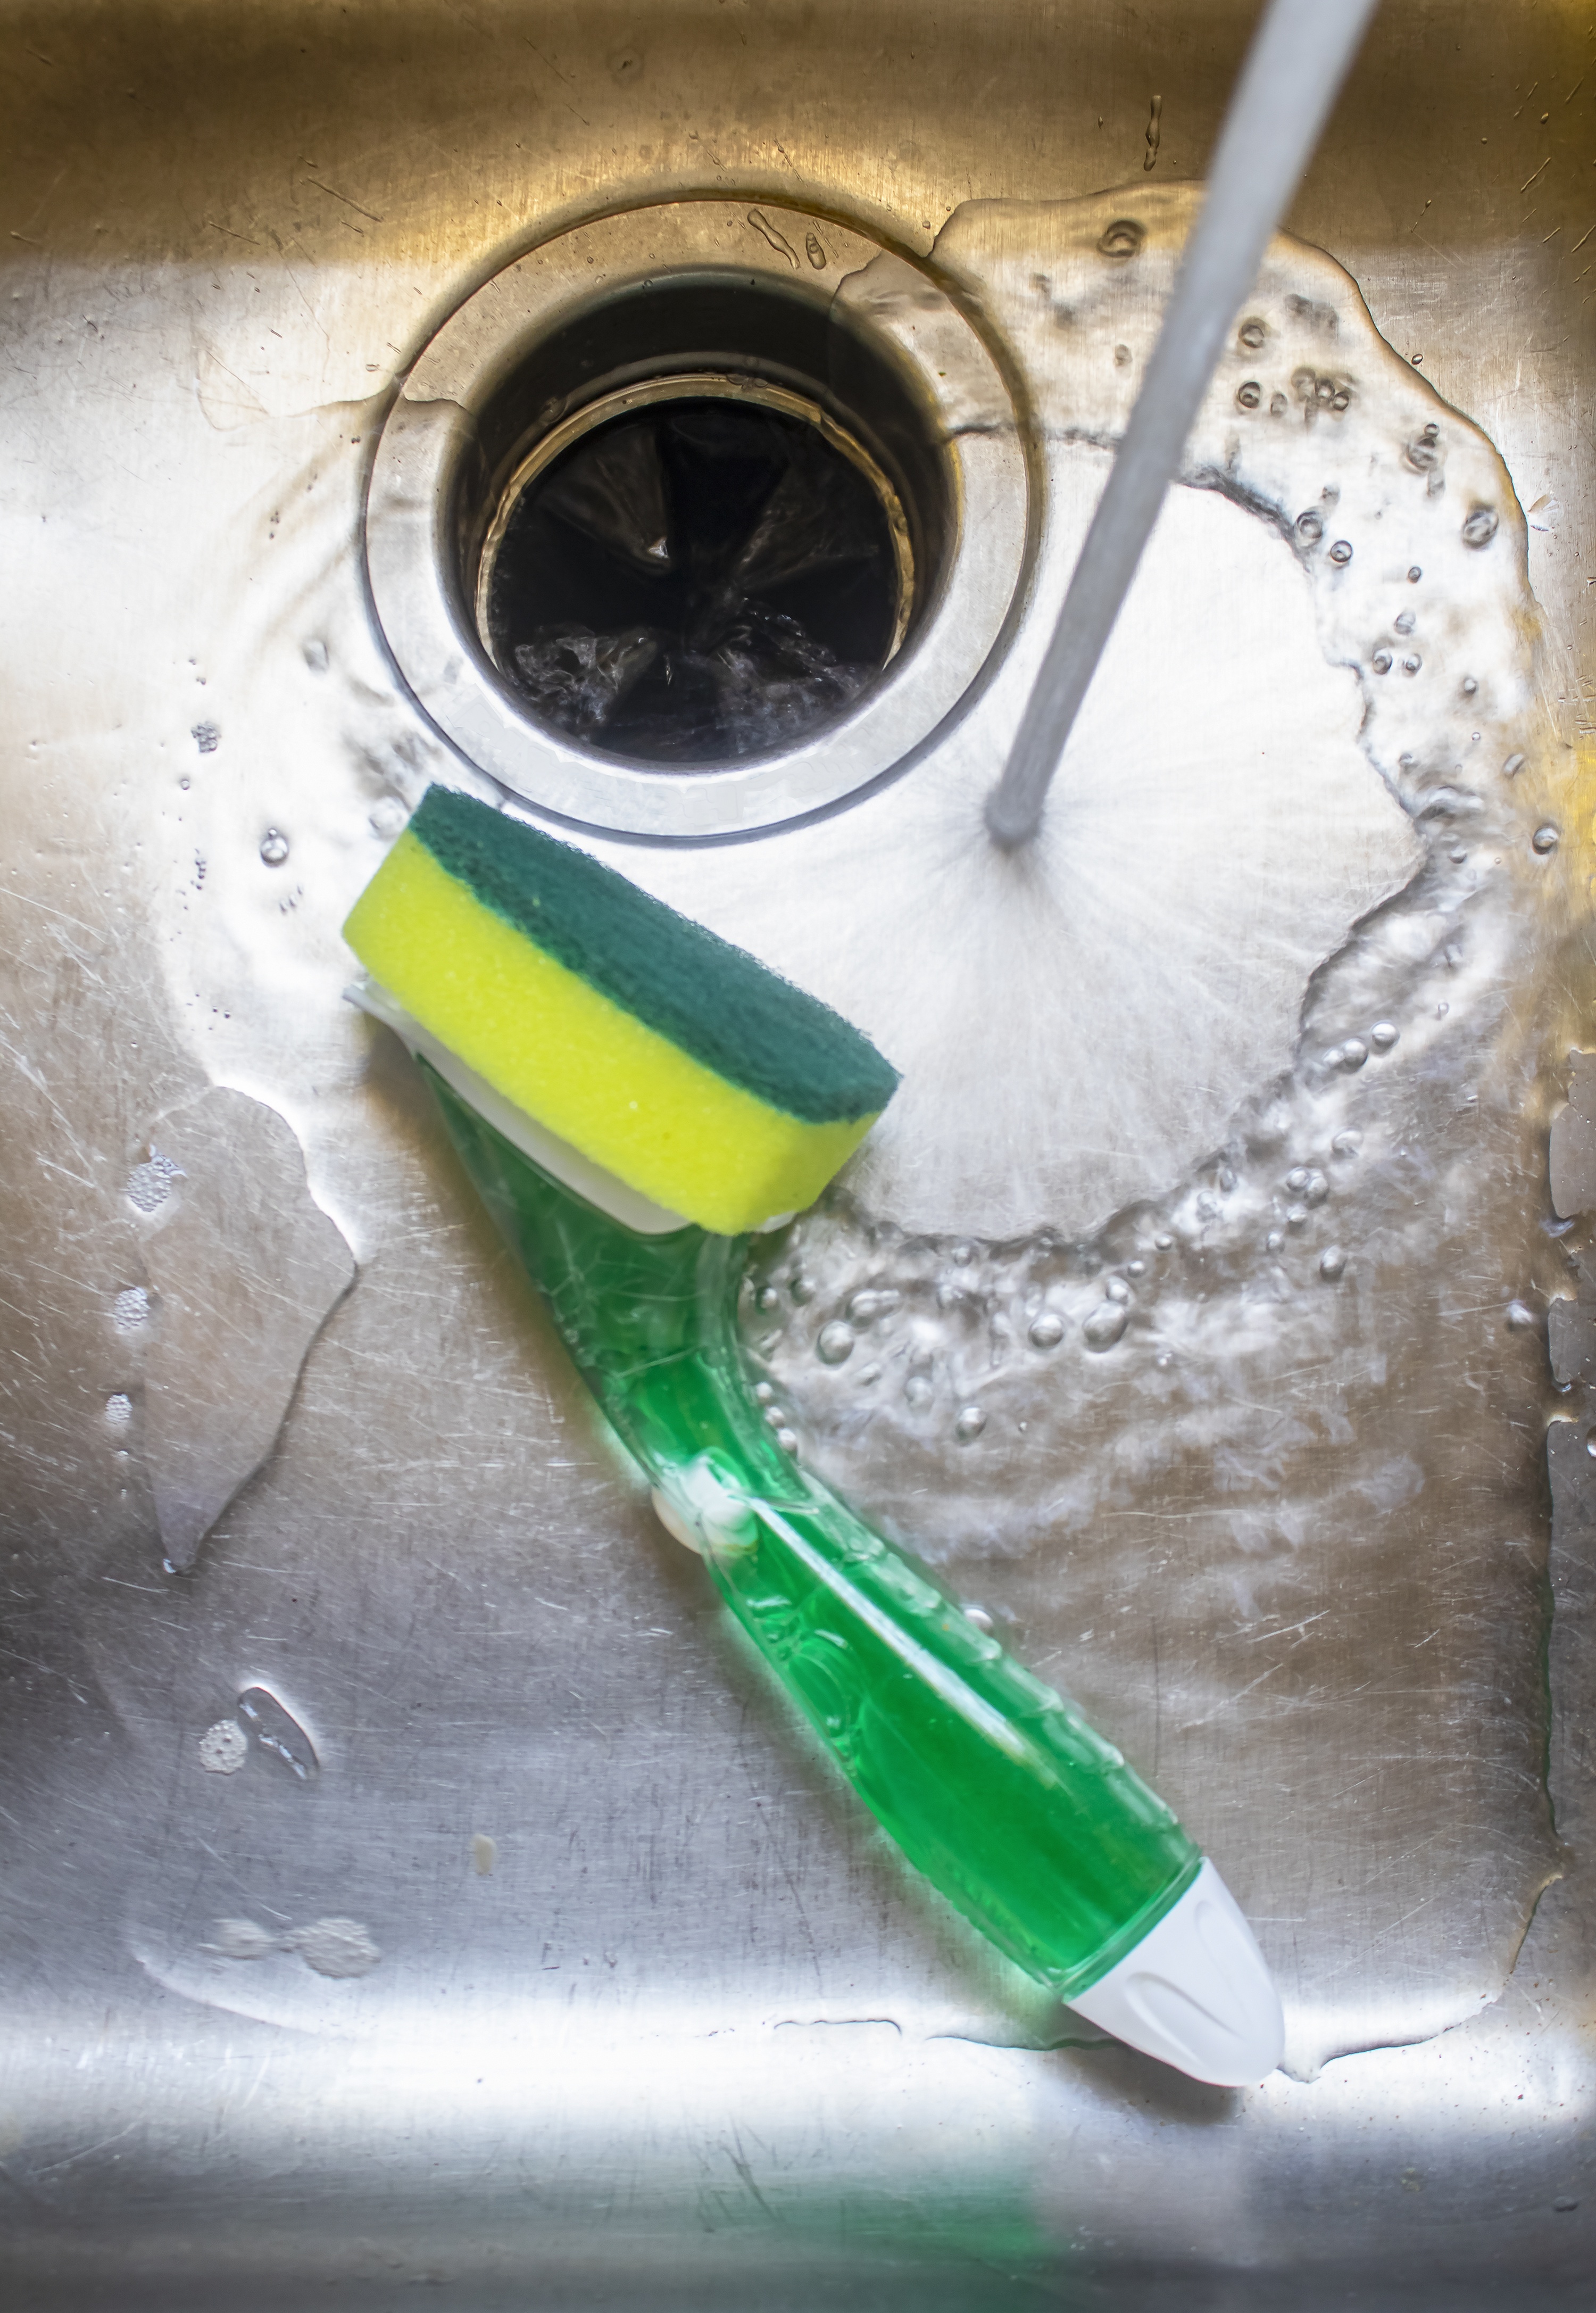 5 Things to Never Put Down Your Garbage Disposal